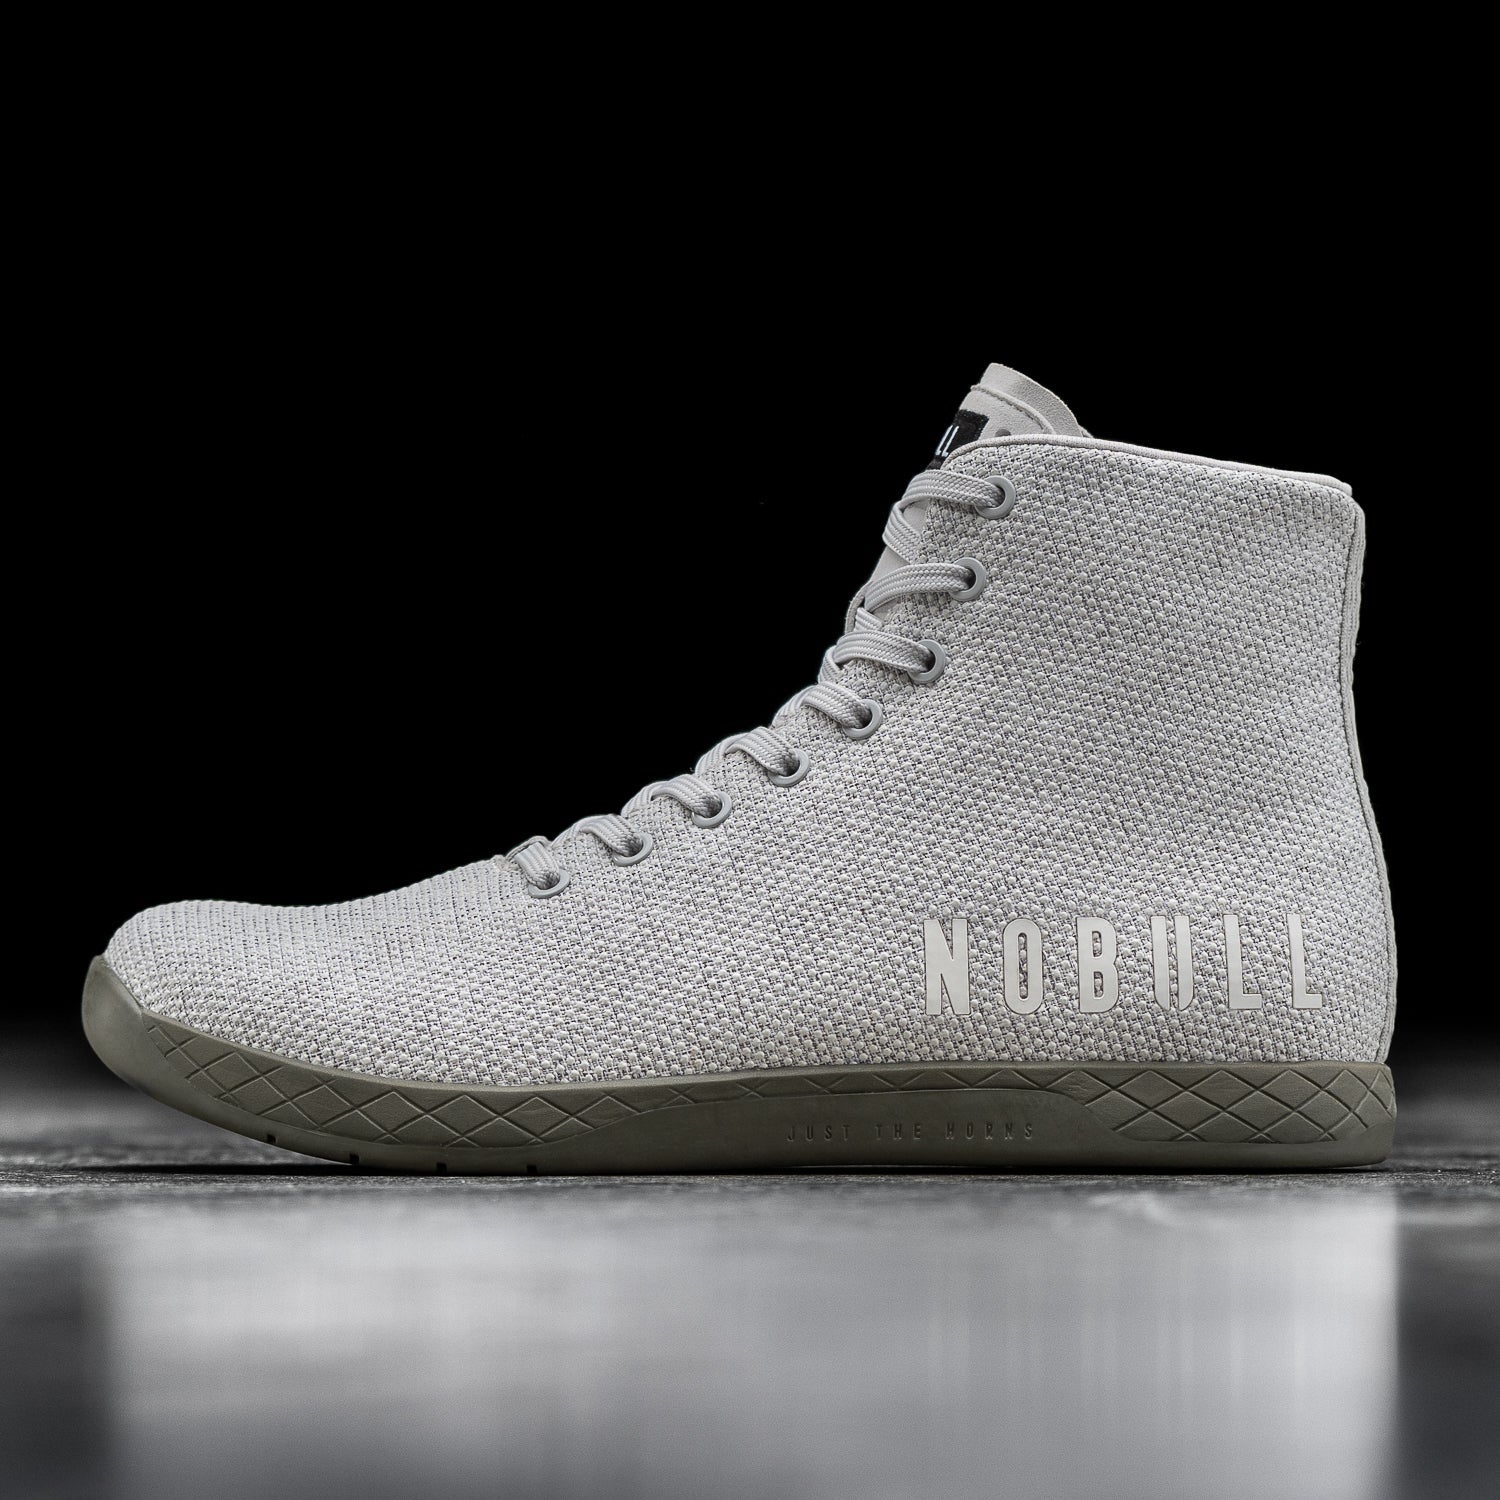 NOBULL High-Top Trainer - Black Heather / Off White